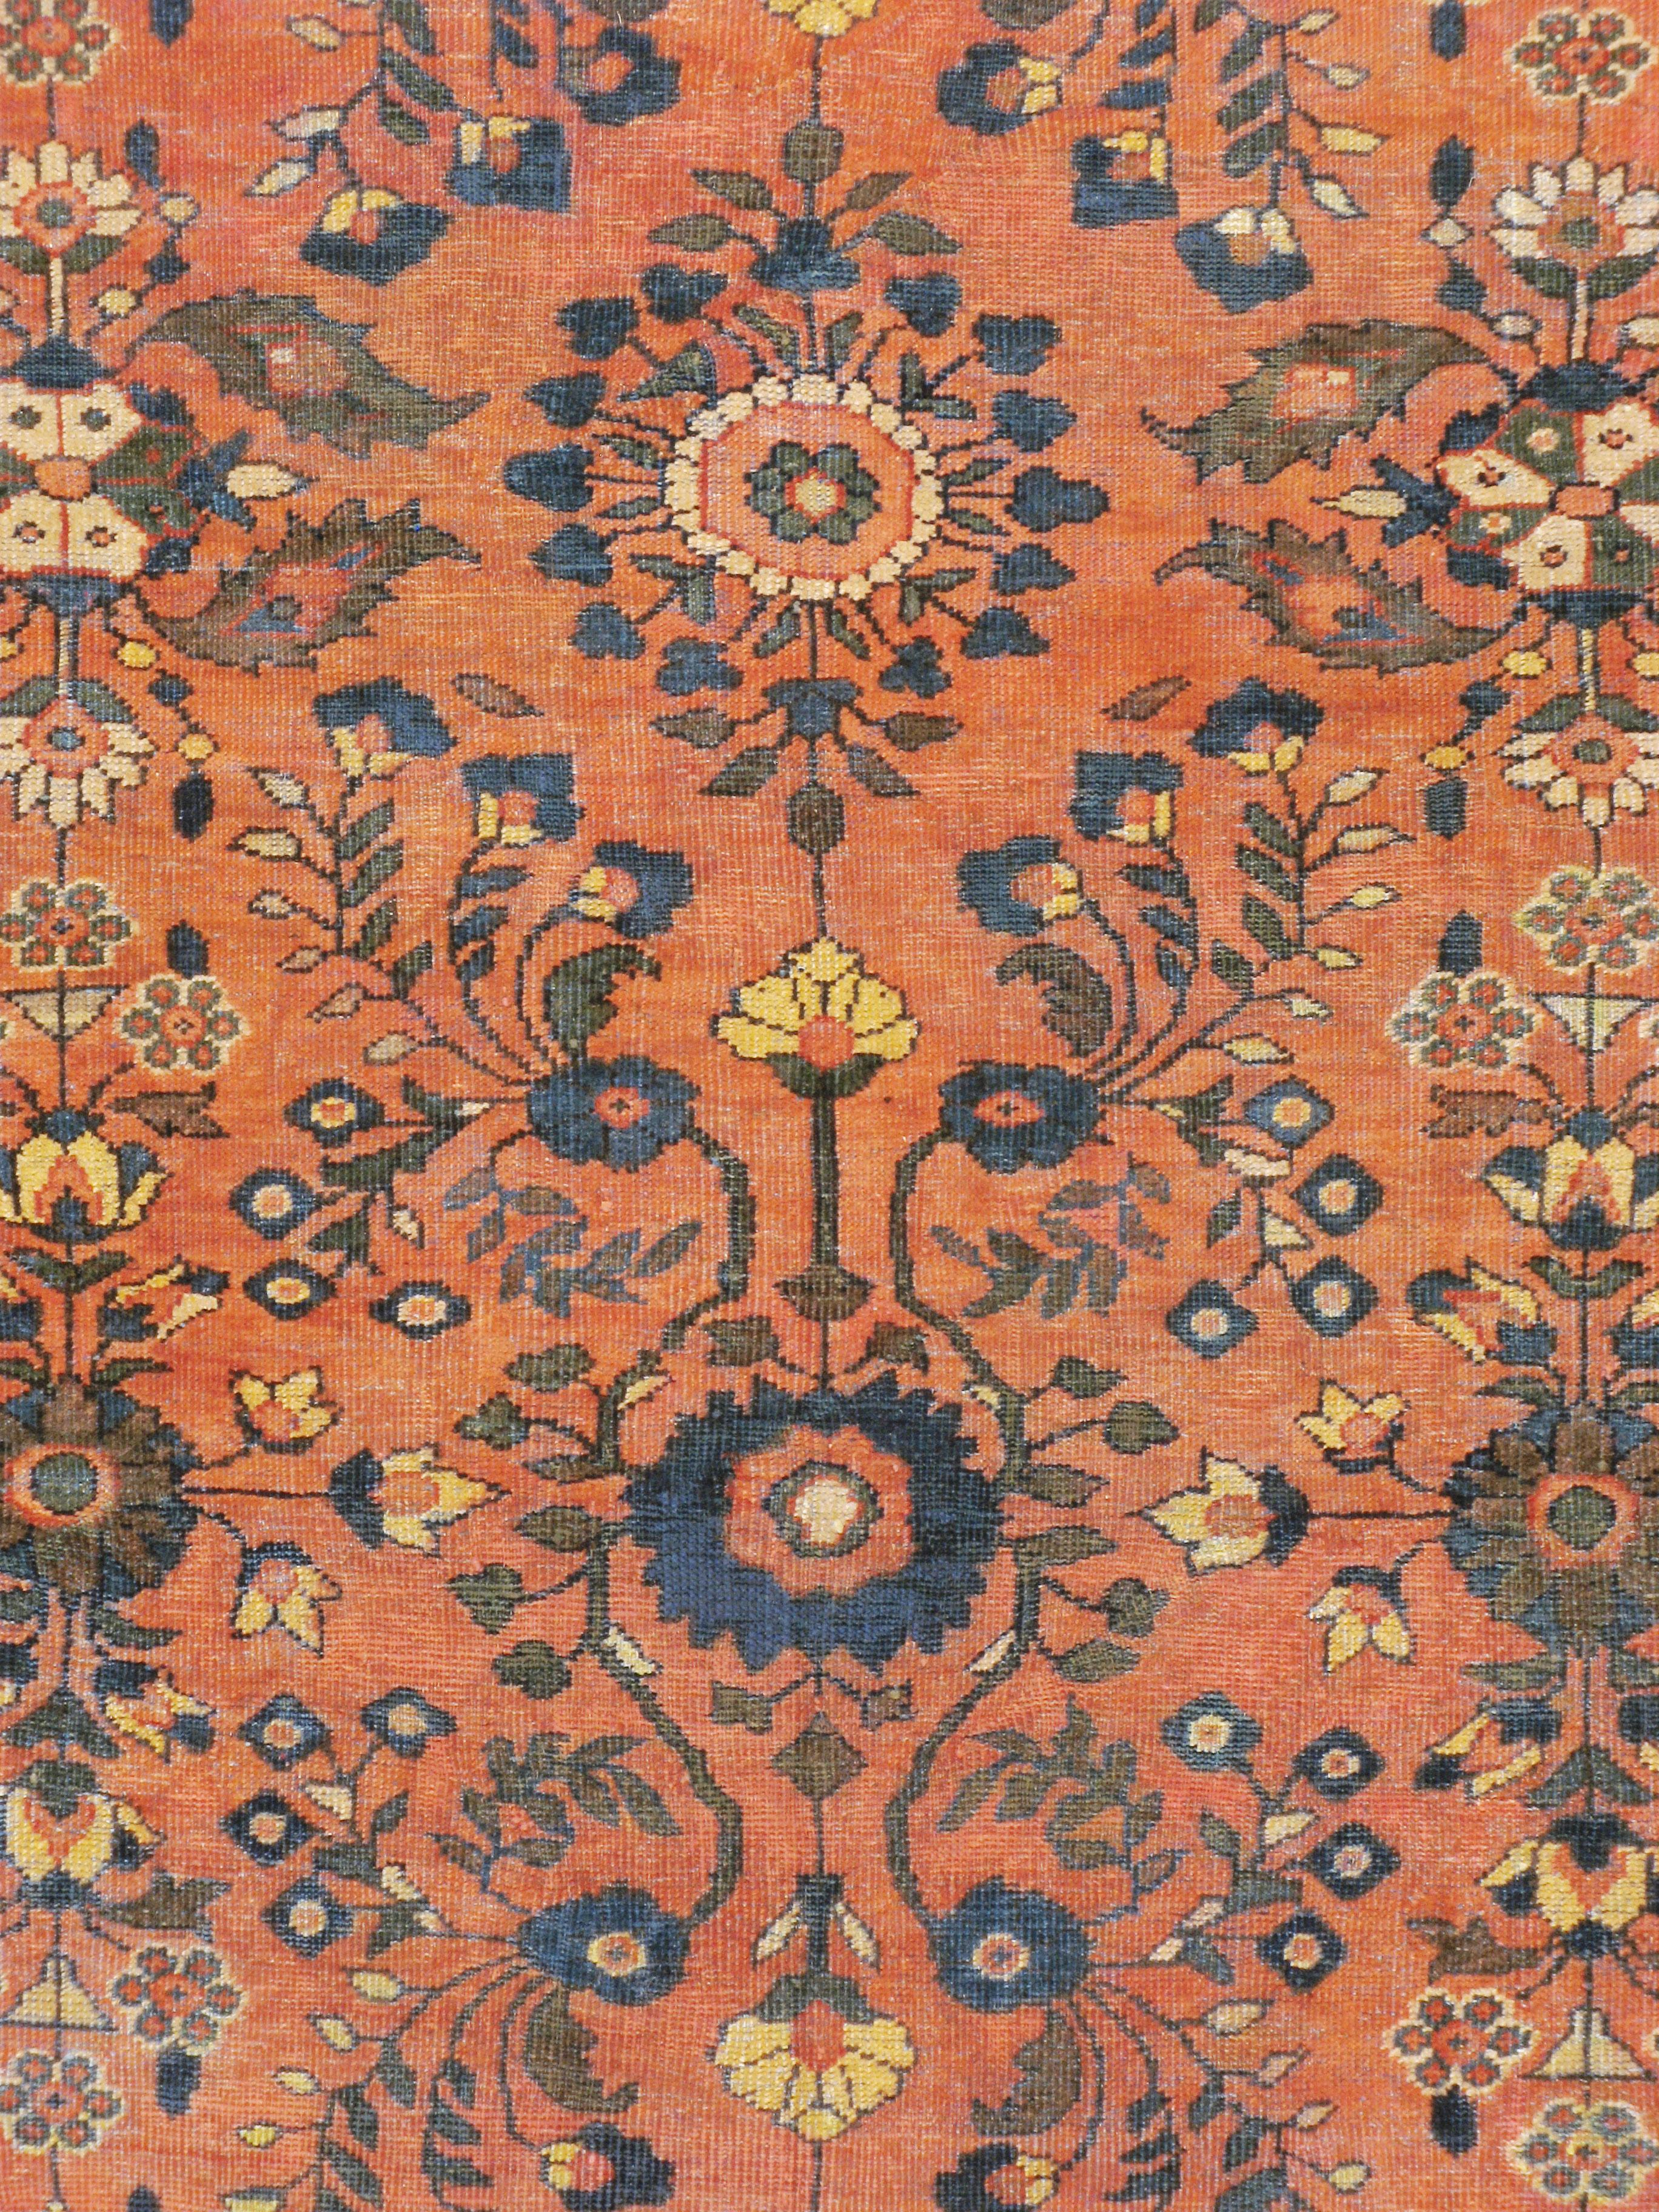 A vintage Persian Mahal carpet from the mid-20th century with an orange field behind a semi-geometric floral pattern in blue and khaki-green often seen on Persian Lilihan carpets. The black border is filled by an overhead view of large floral